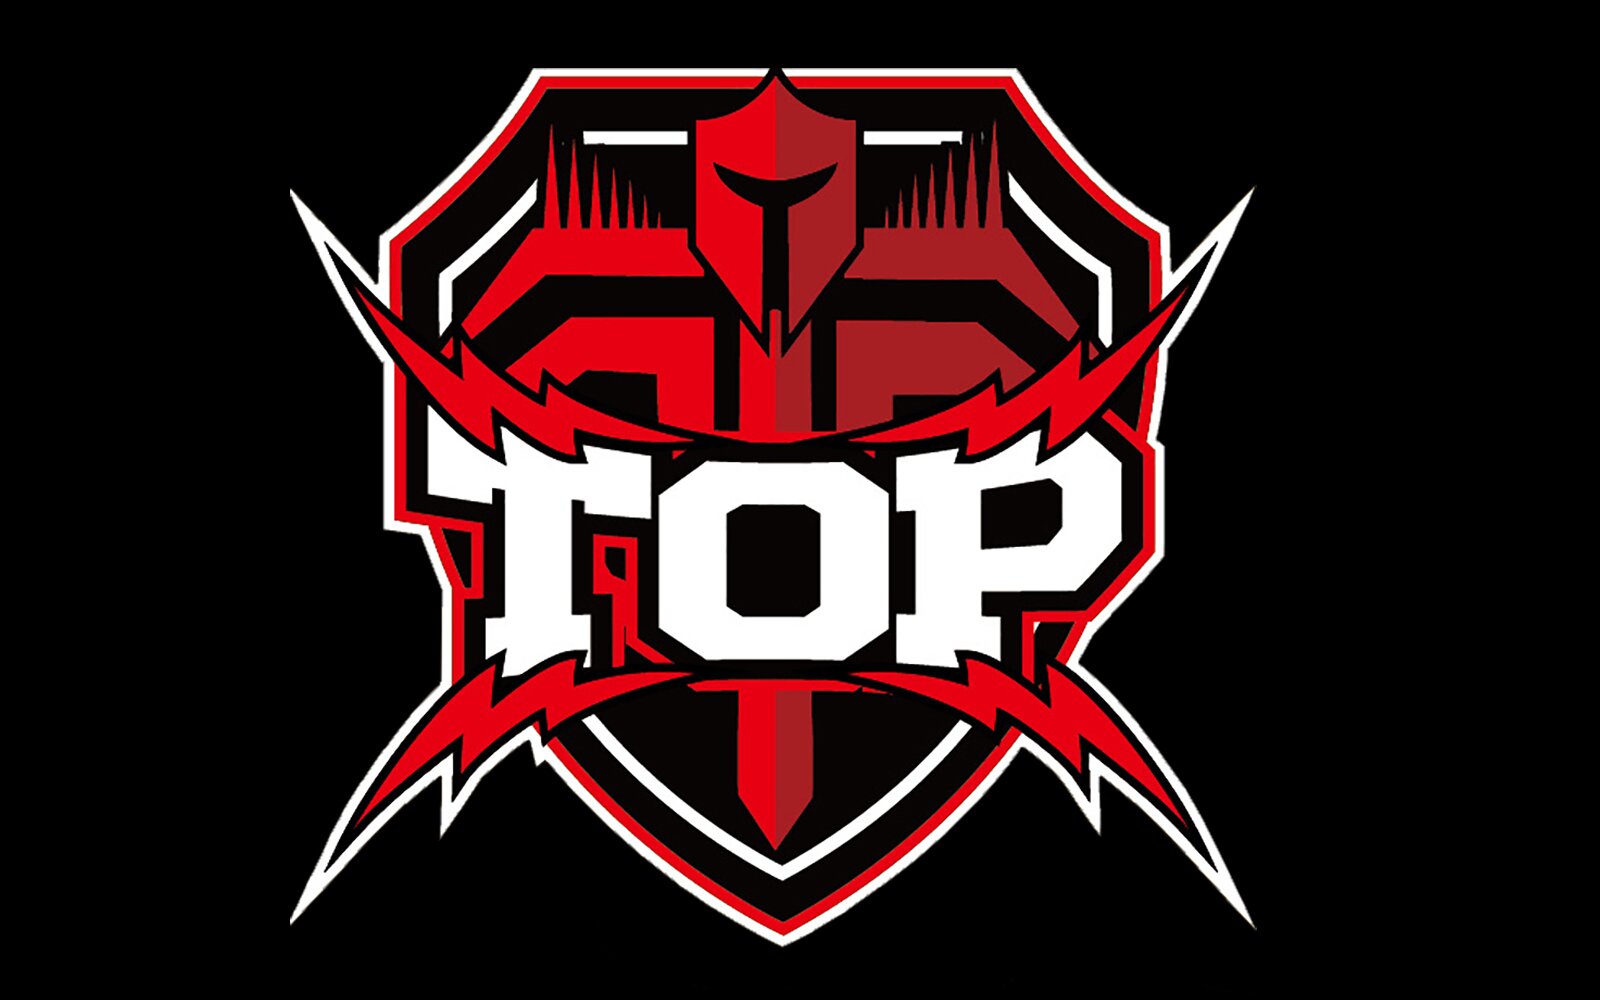 Topsports Gaming were a popular dark horse candidate to make a run in the LPL, and in Week 5 they showed that capability going 2-0.